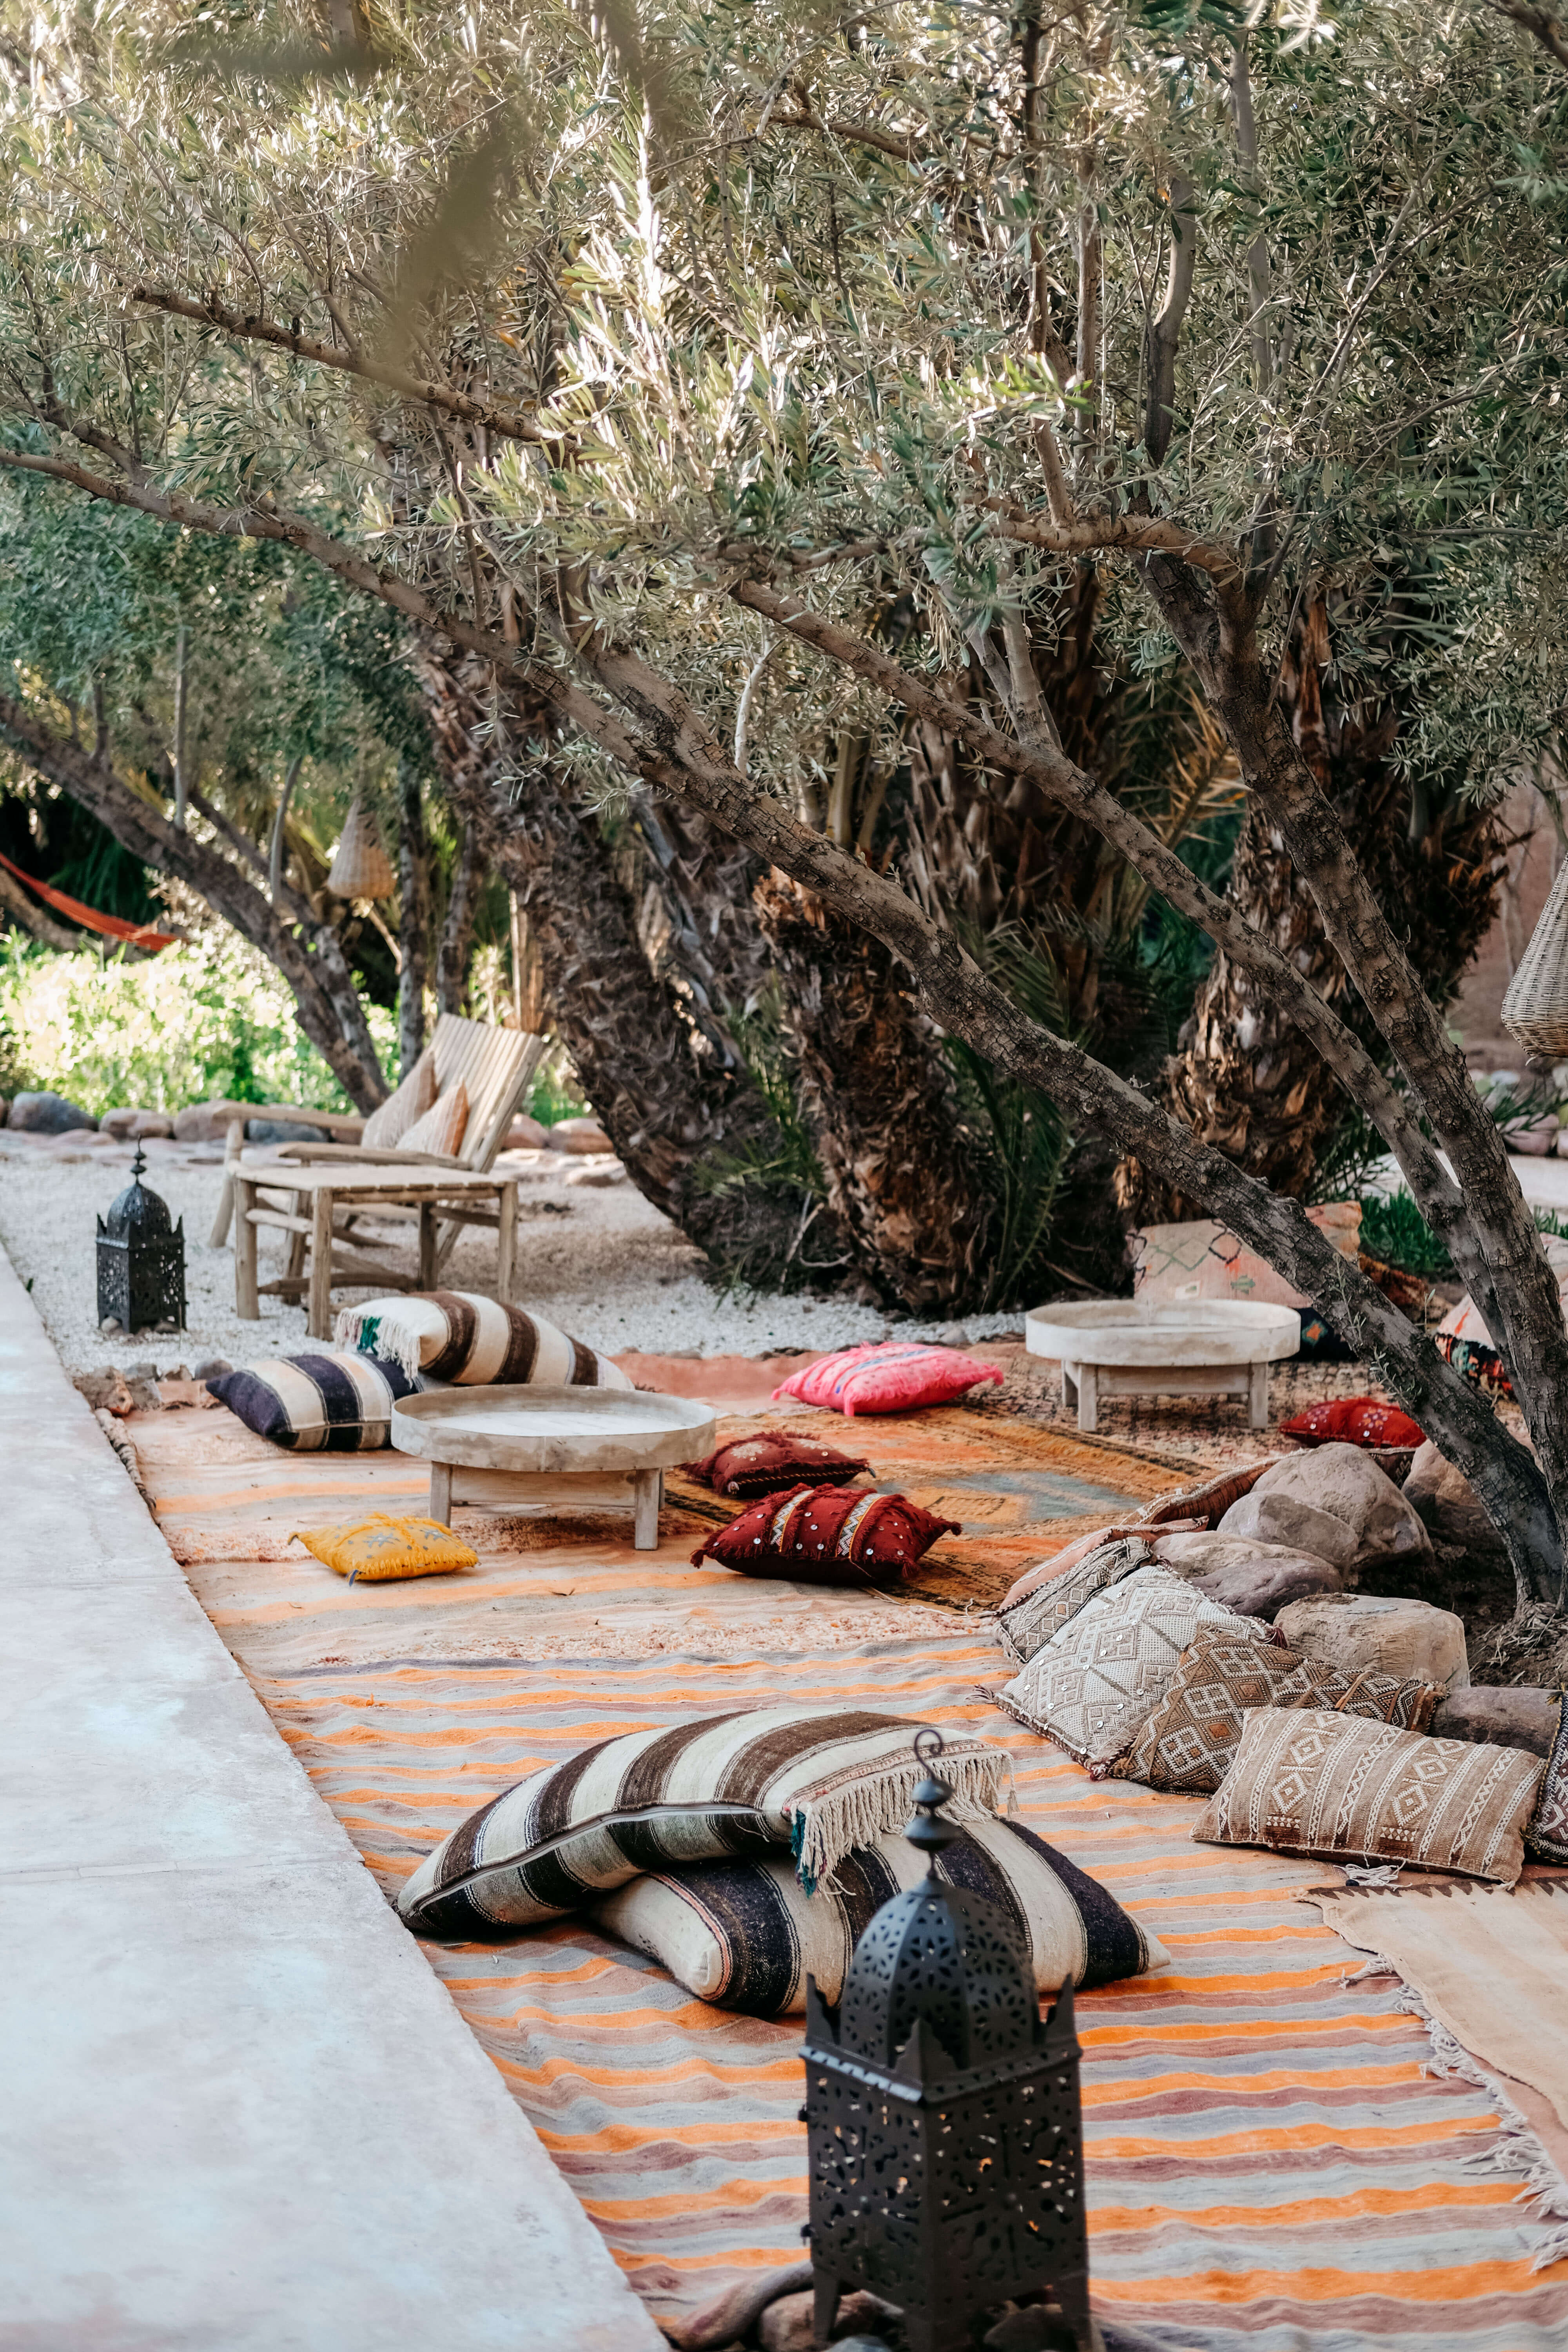 outside at l'ma lodge in Morocco